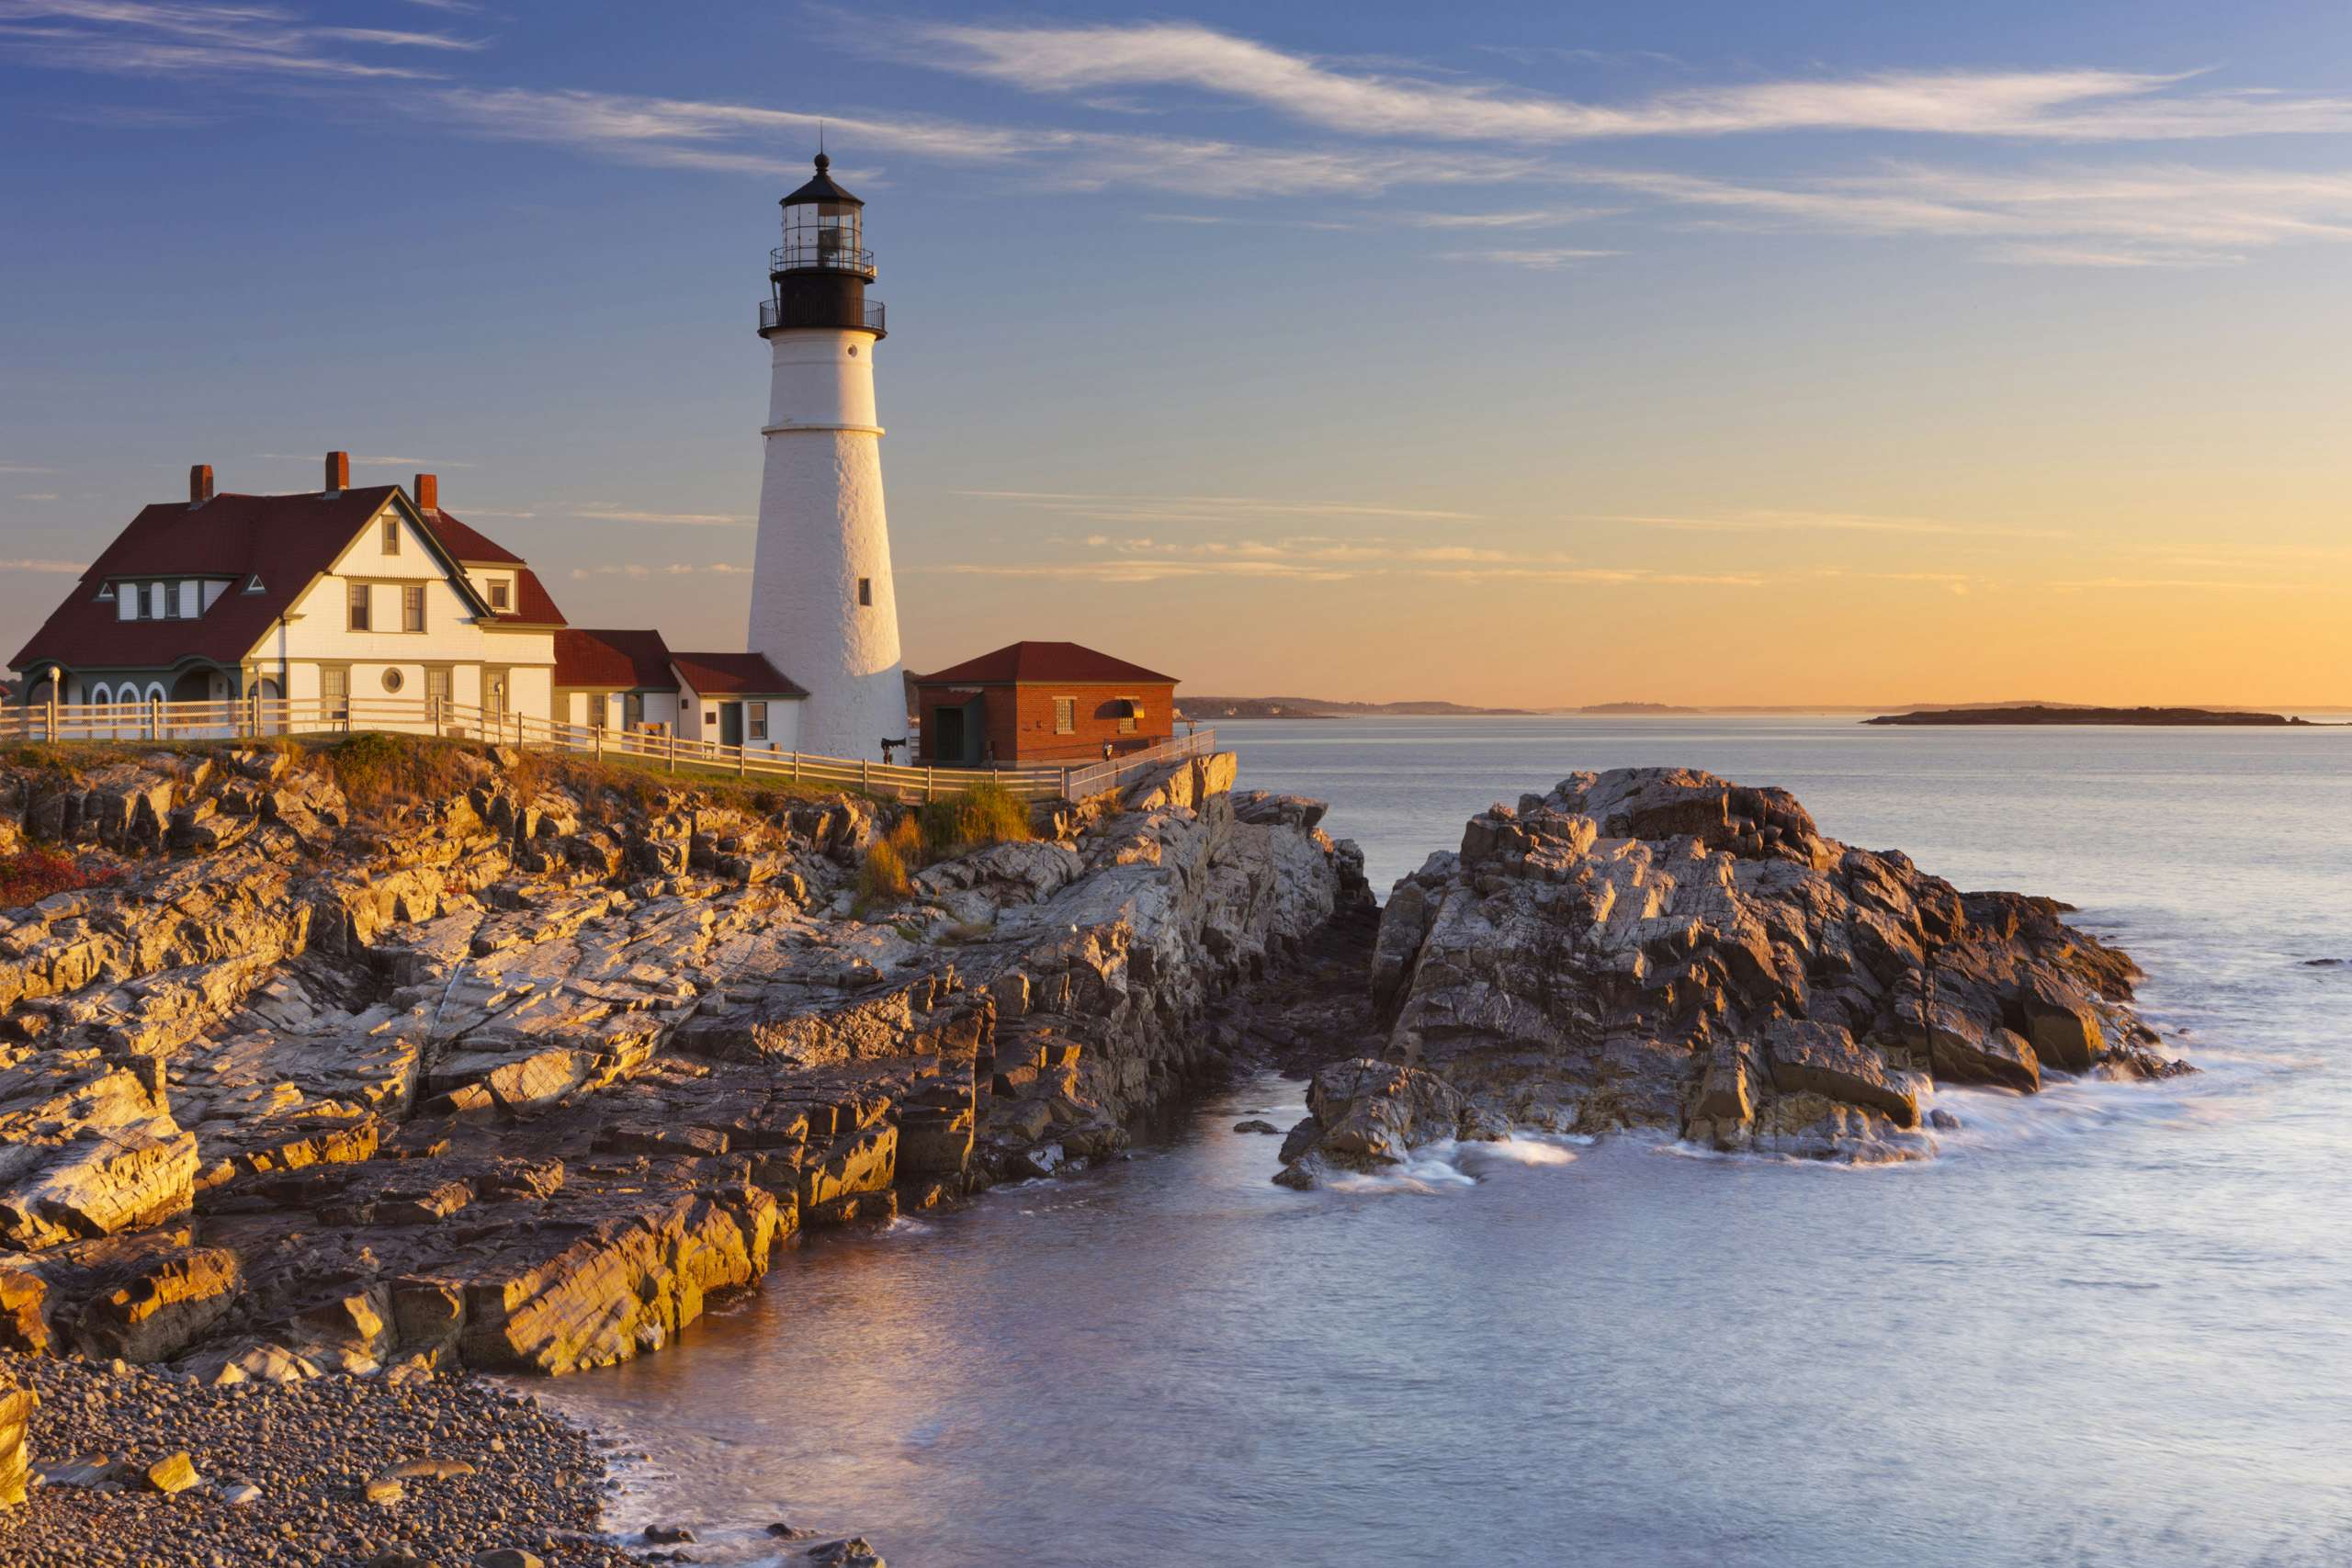 New England light house over the rocks and ocean